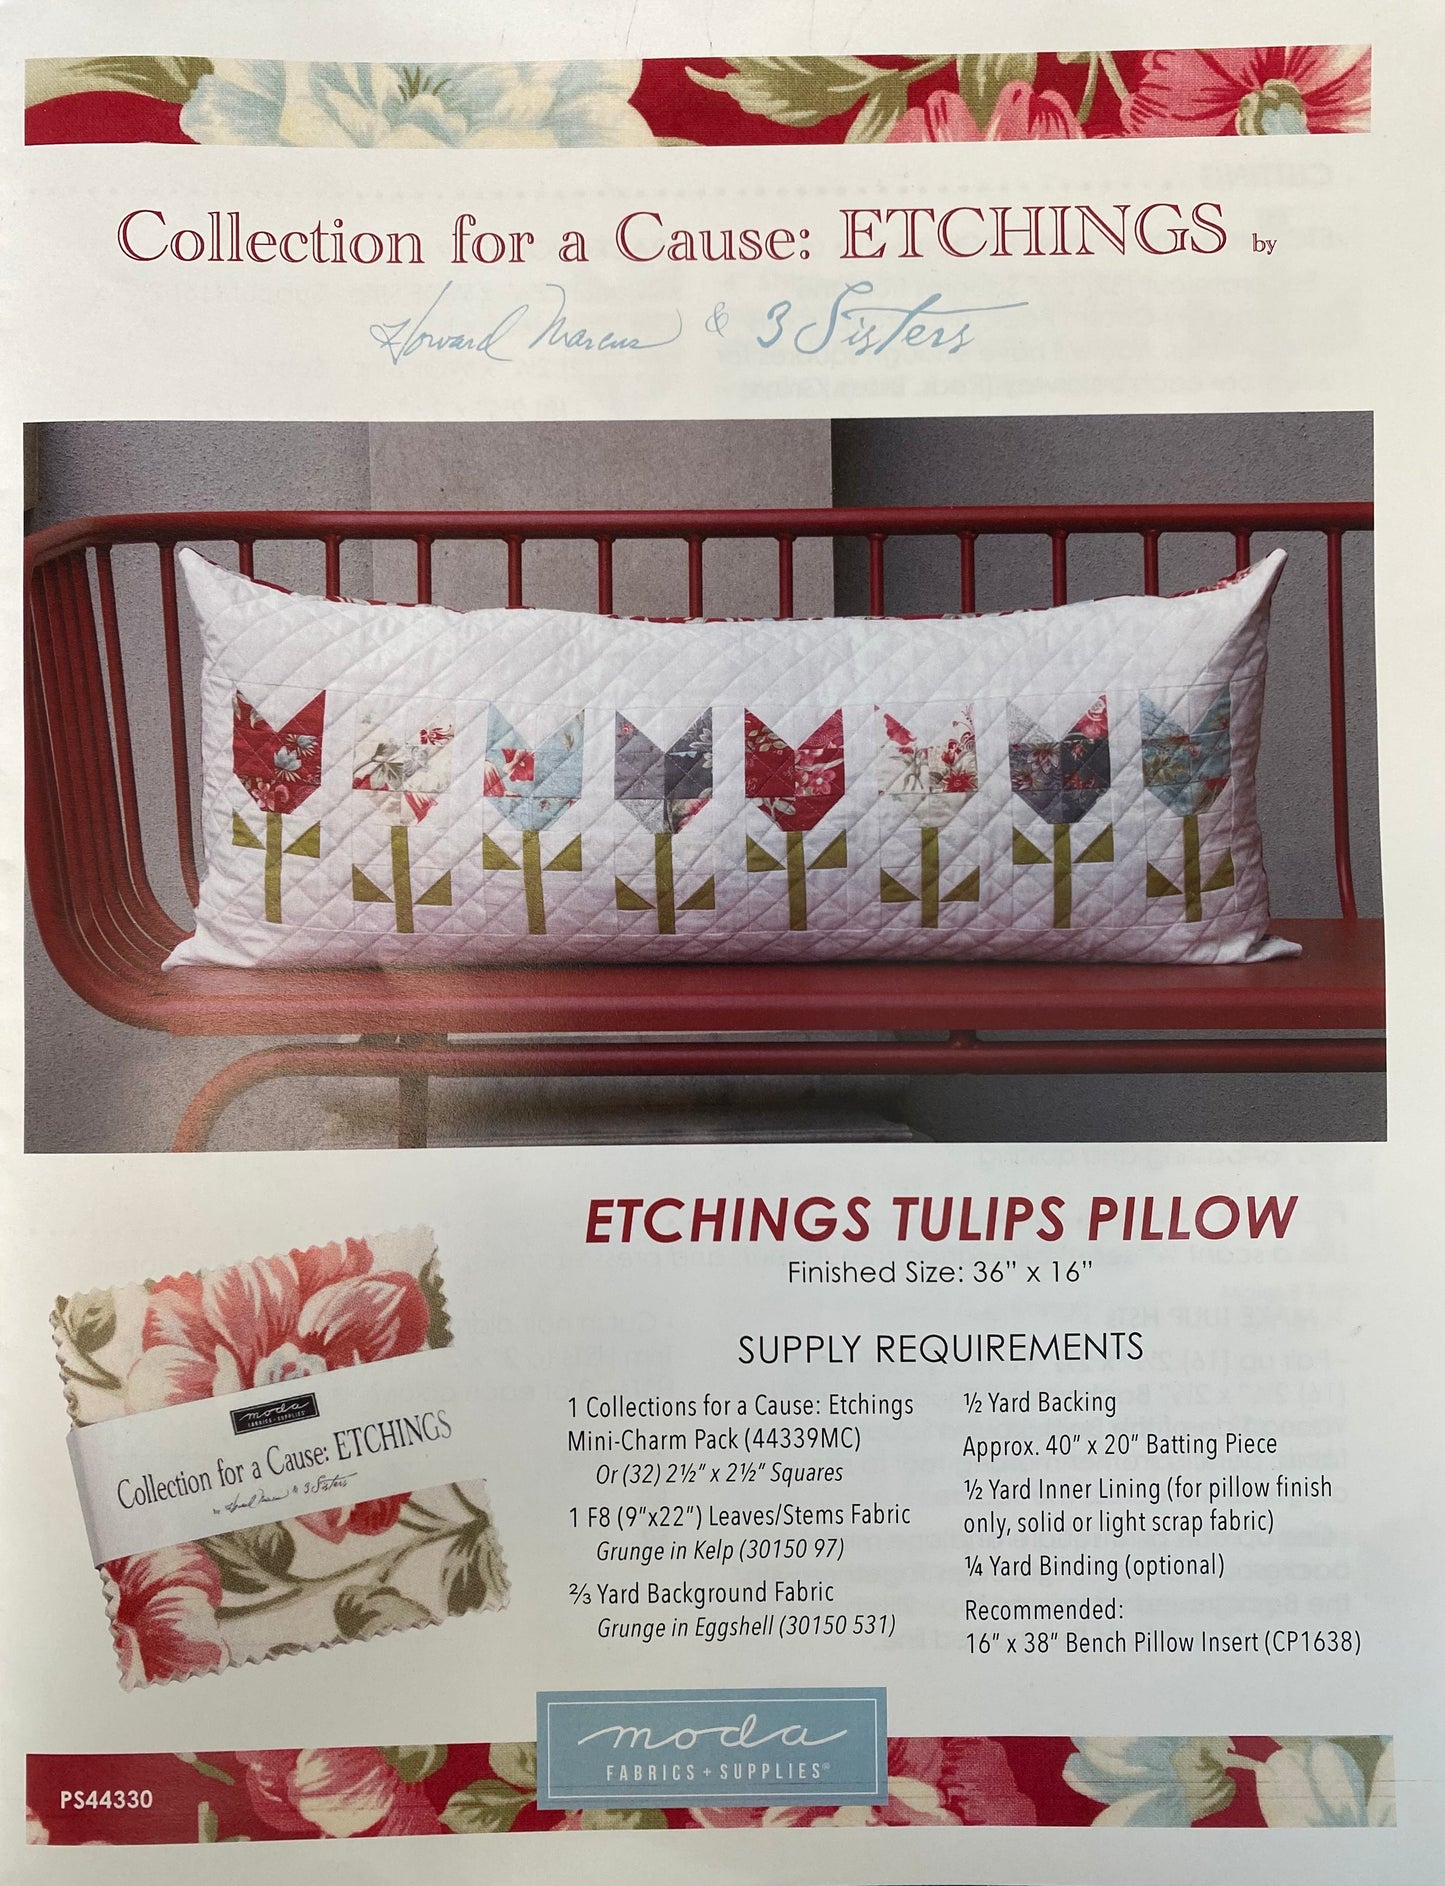 Etchings Tulips Pillow Quilt Kit